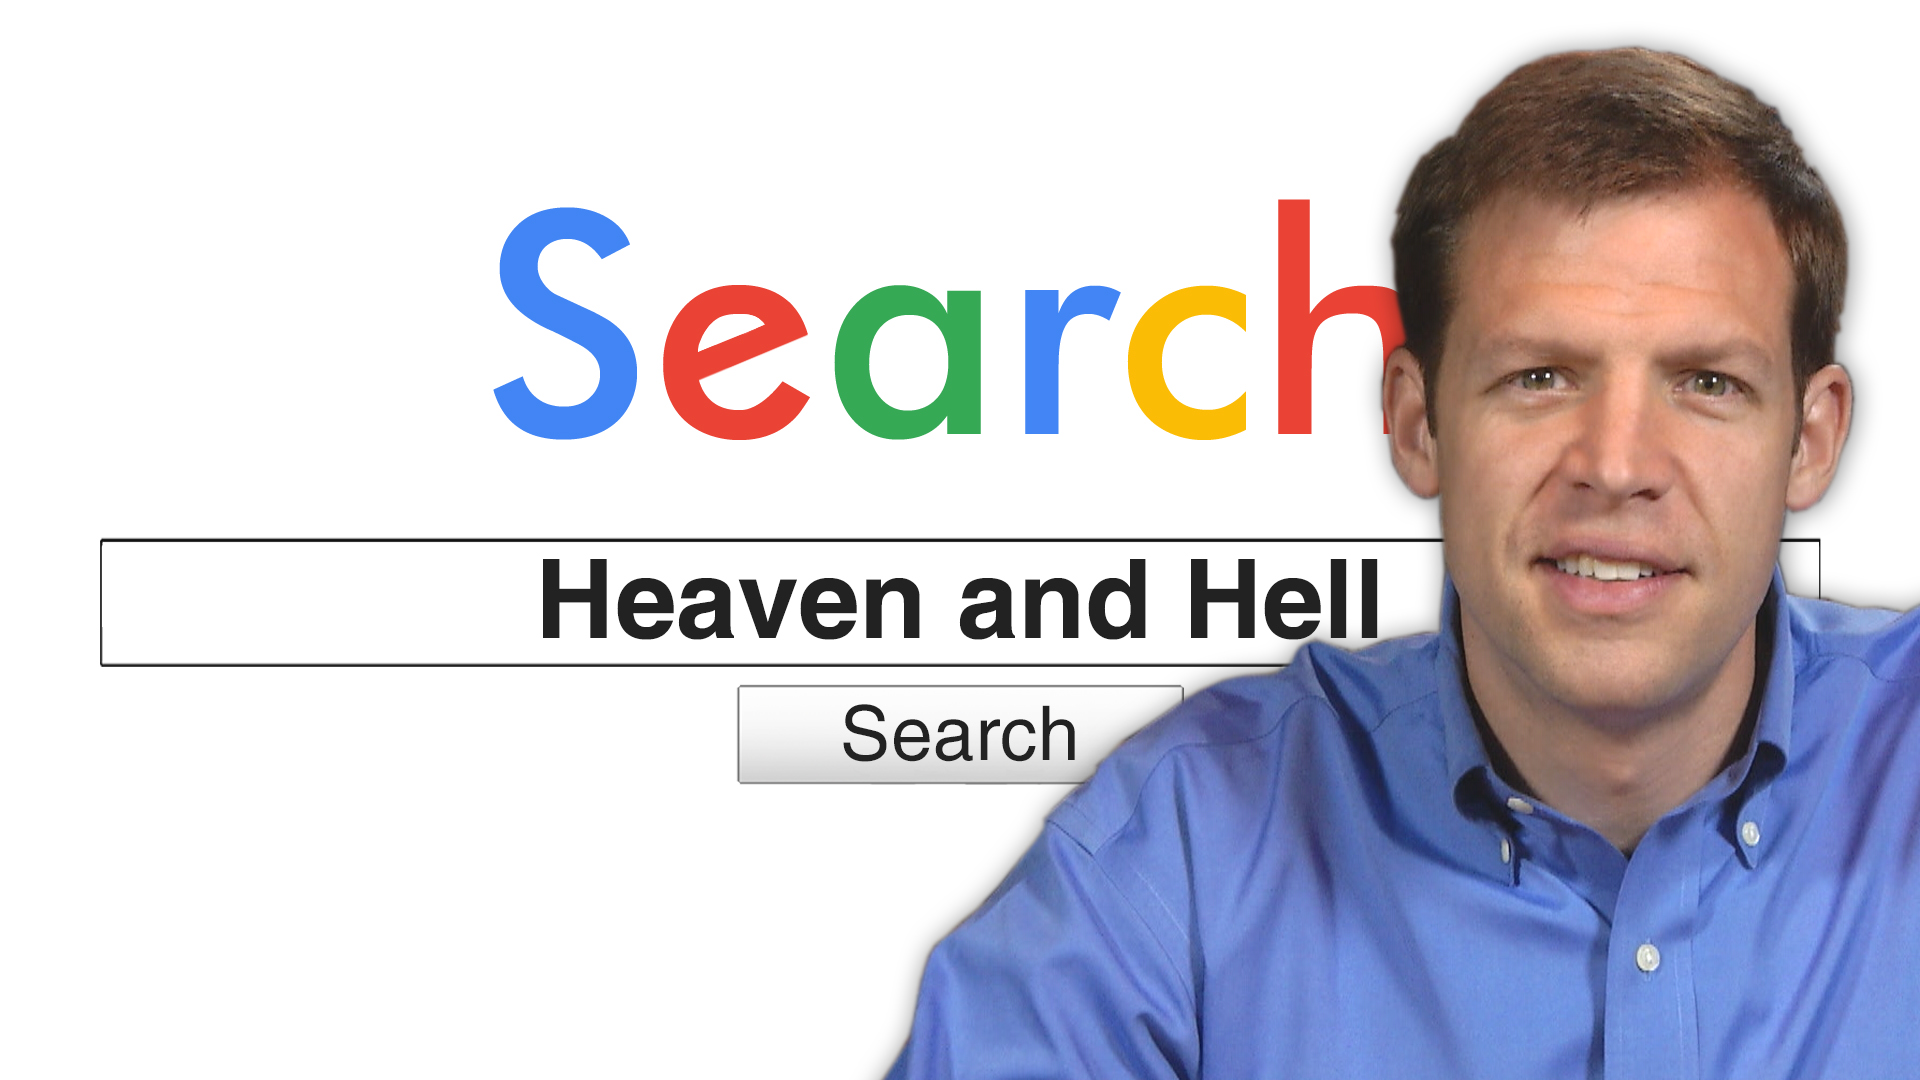 Search Heaven and Hell